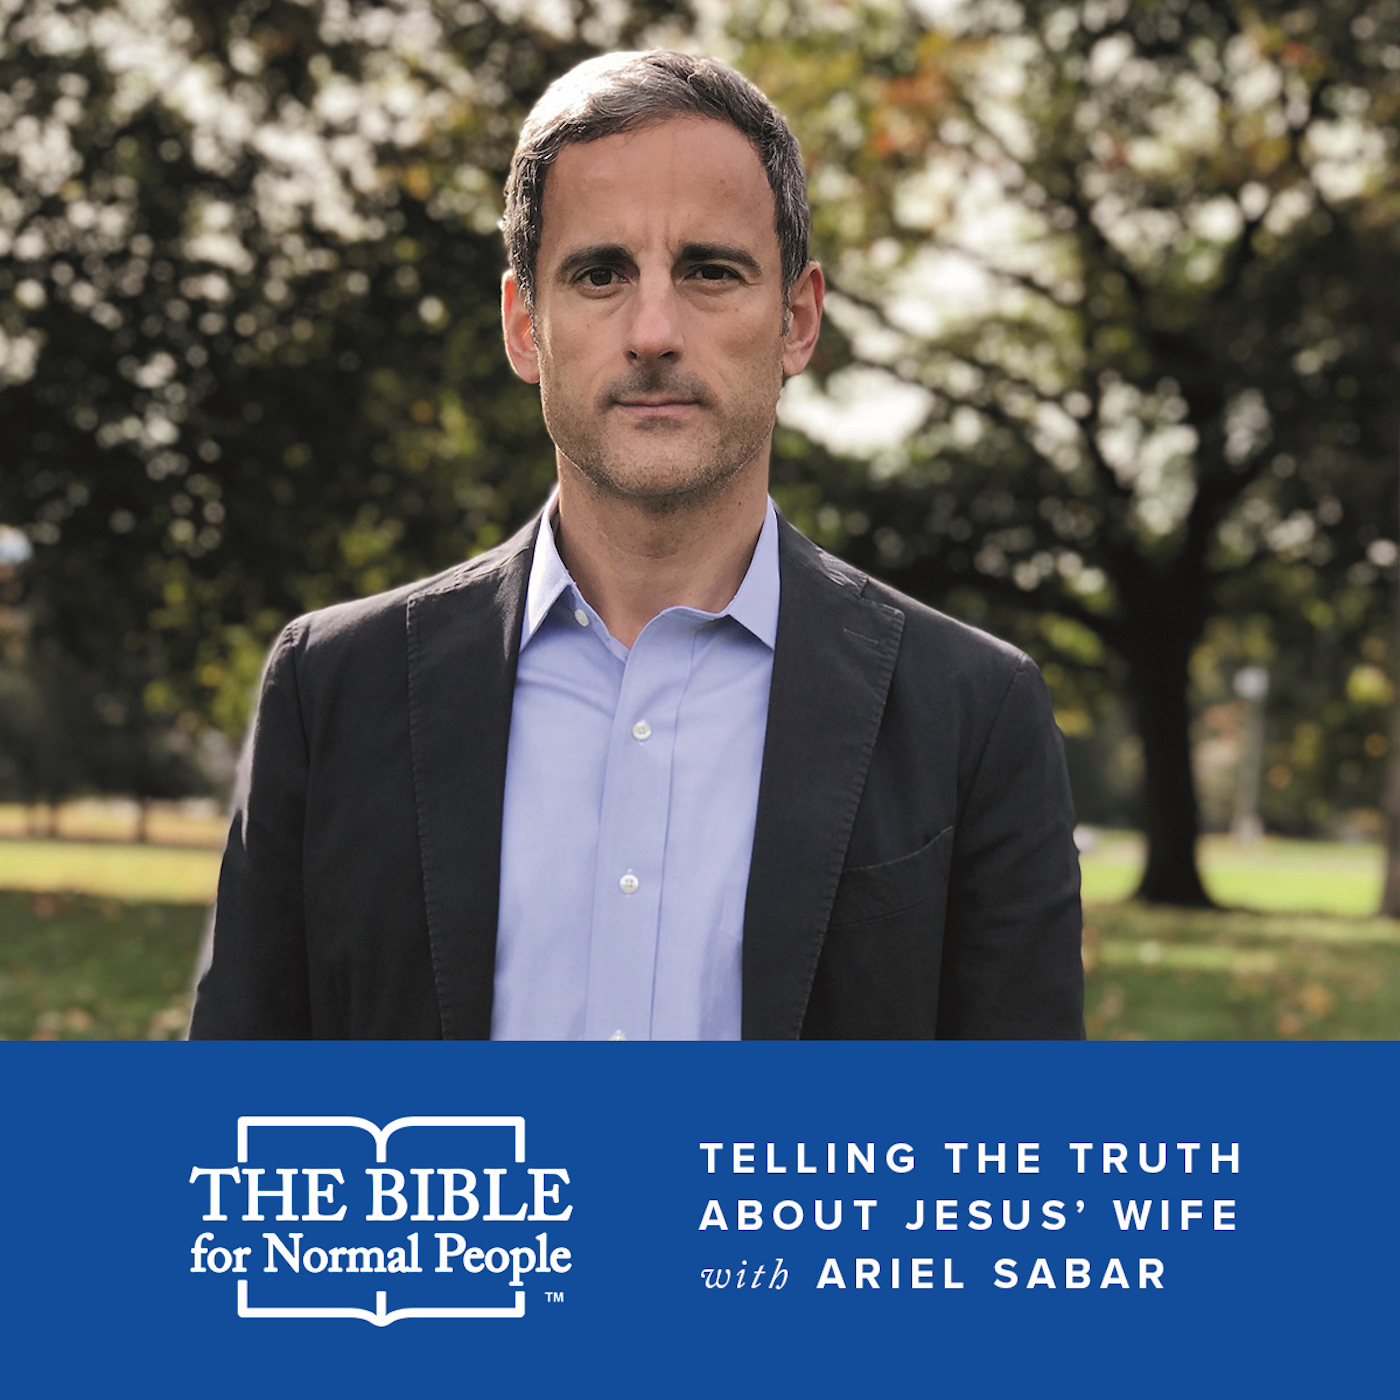 Interview with Ariel Sabar – Telling the Truth About Jesus’ Wife